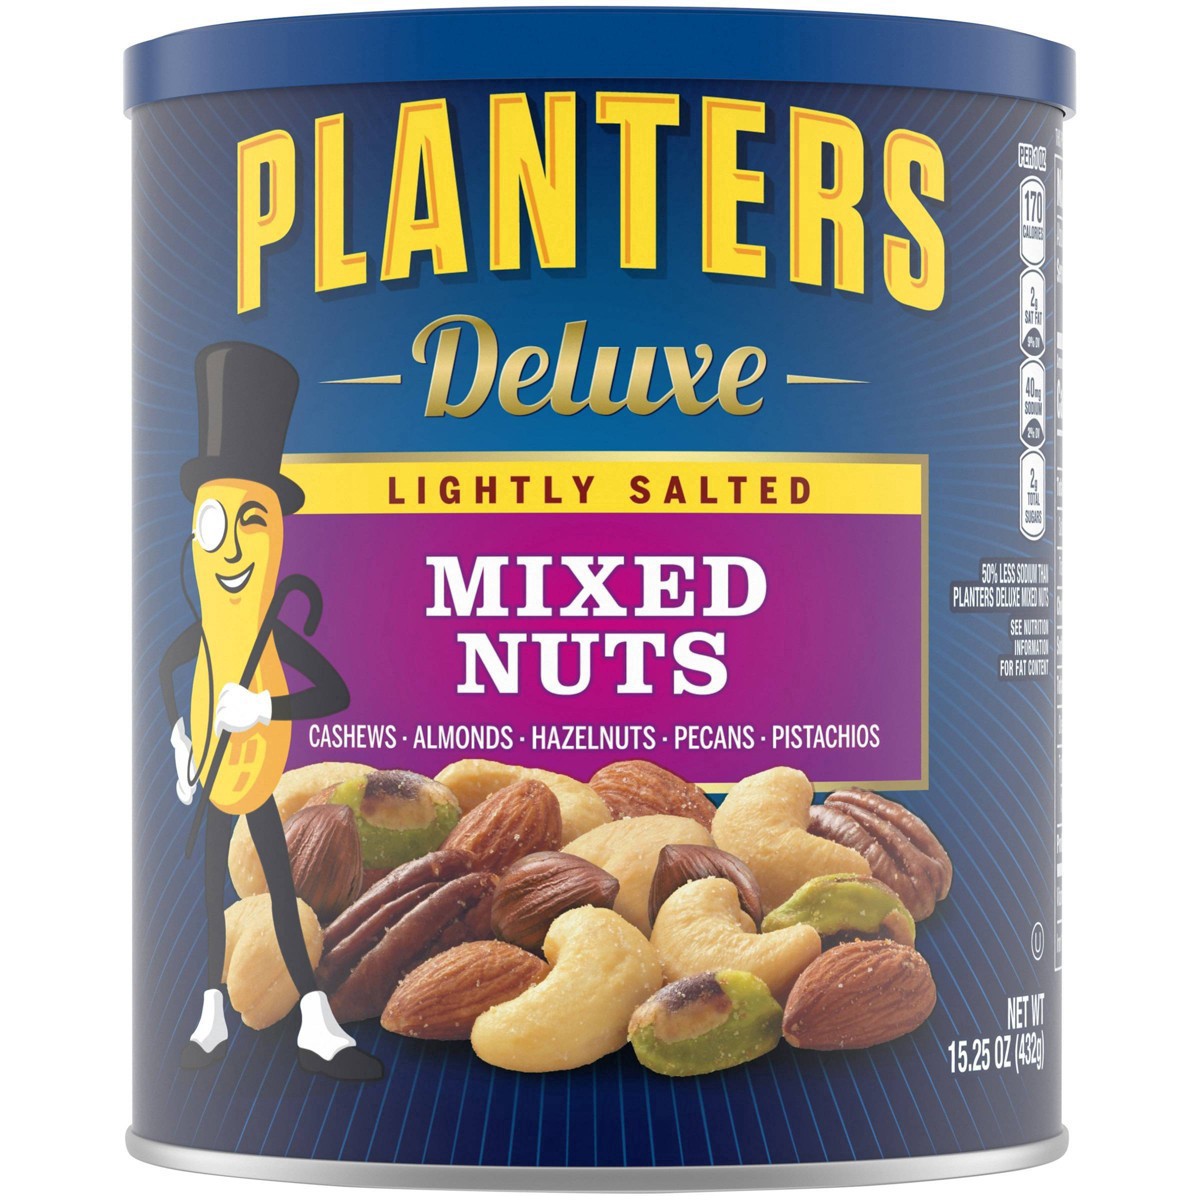 slide 9 of 46, Planters Deluxe Lightly Salted Mixed Nuts 15.25 oz, 15.25 oz